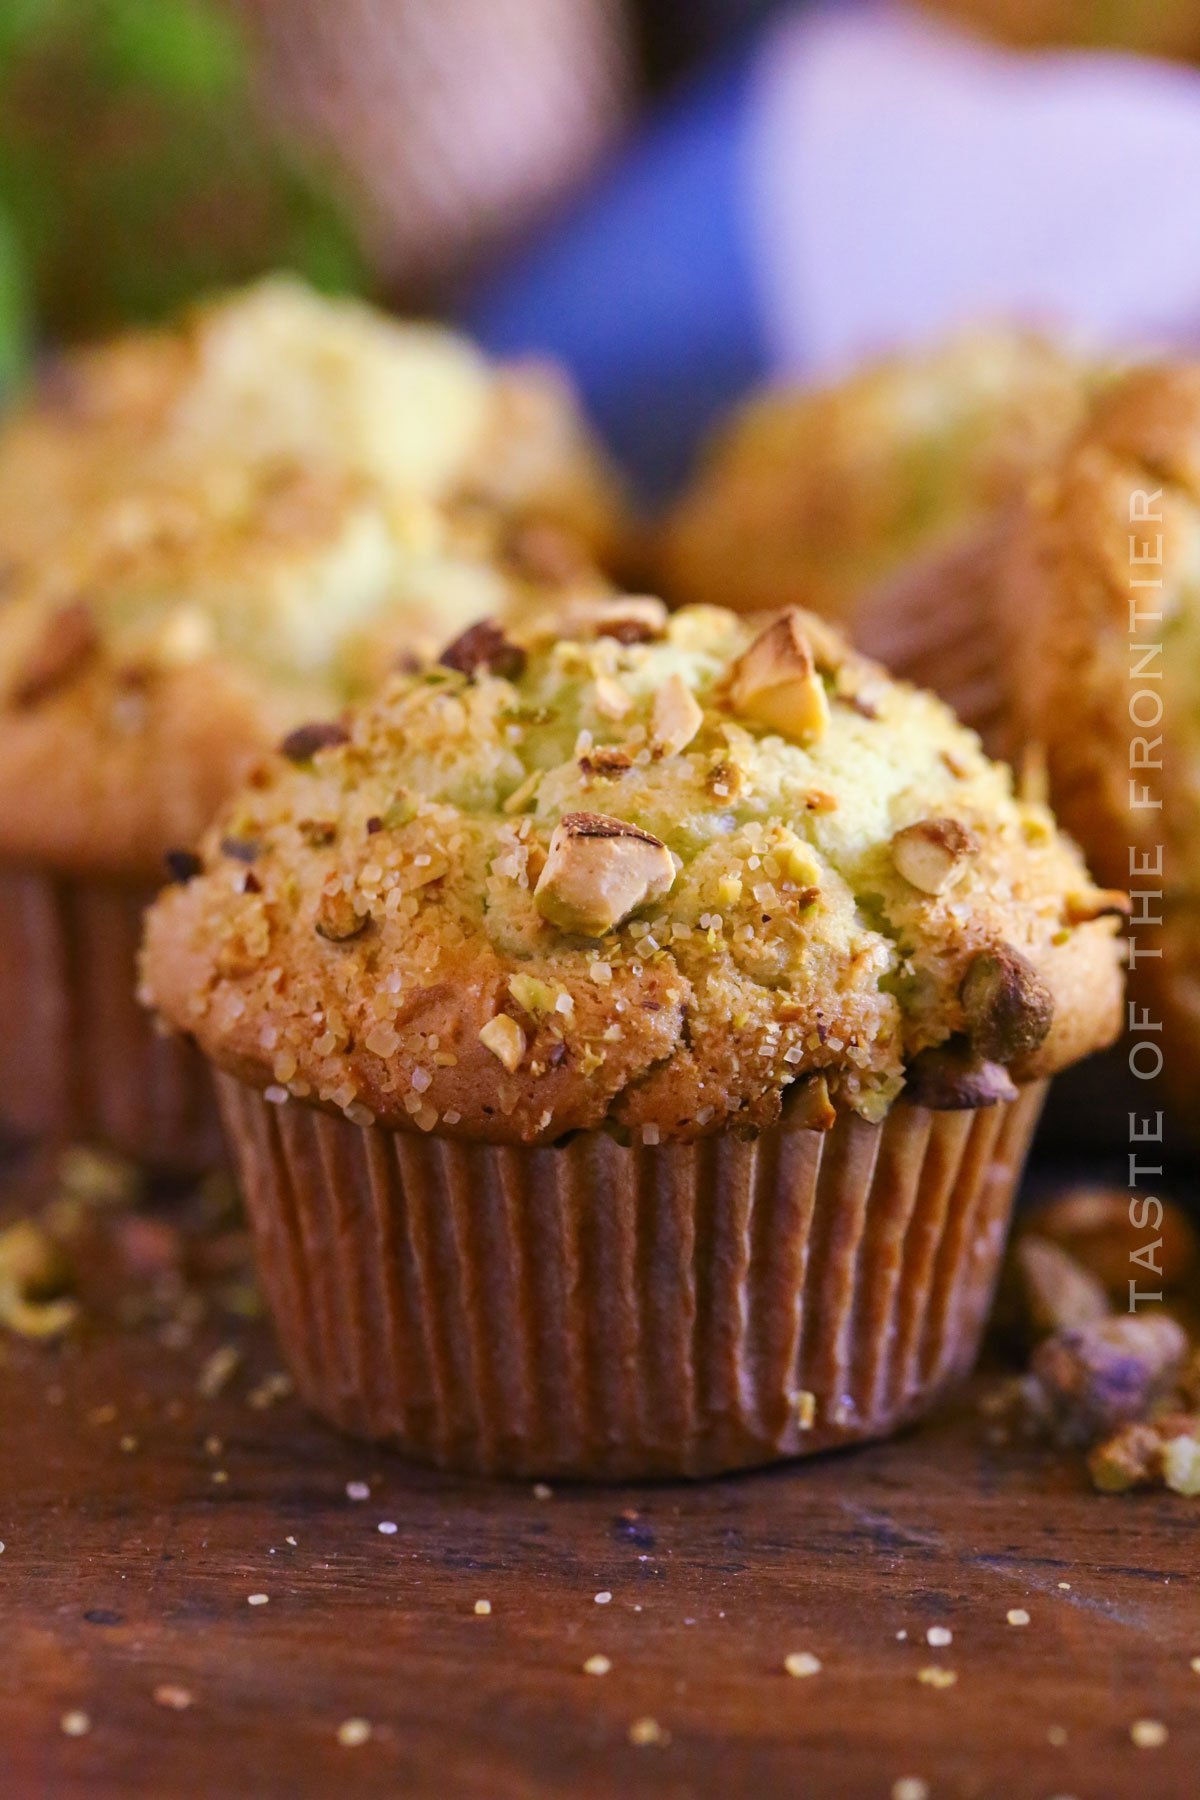 bakery-style Pistachio Muffins